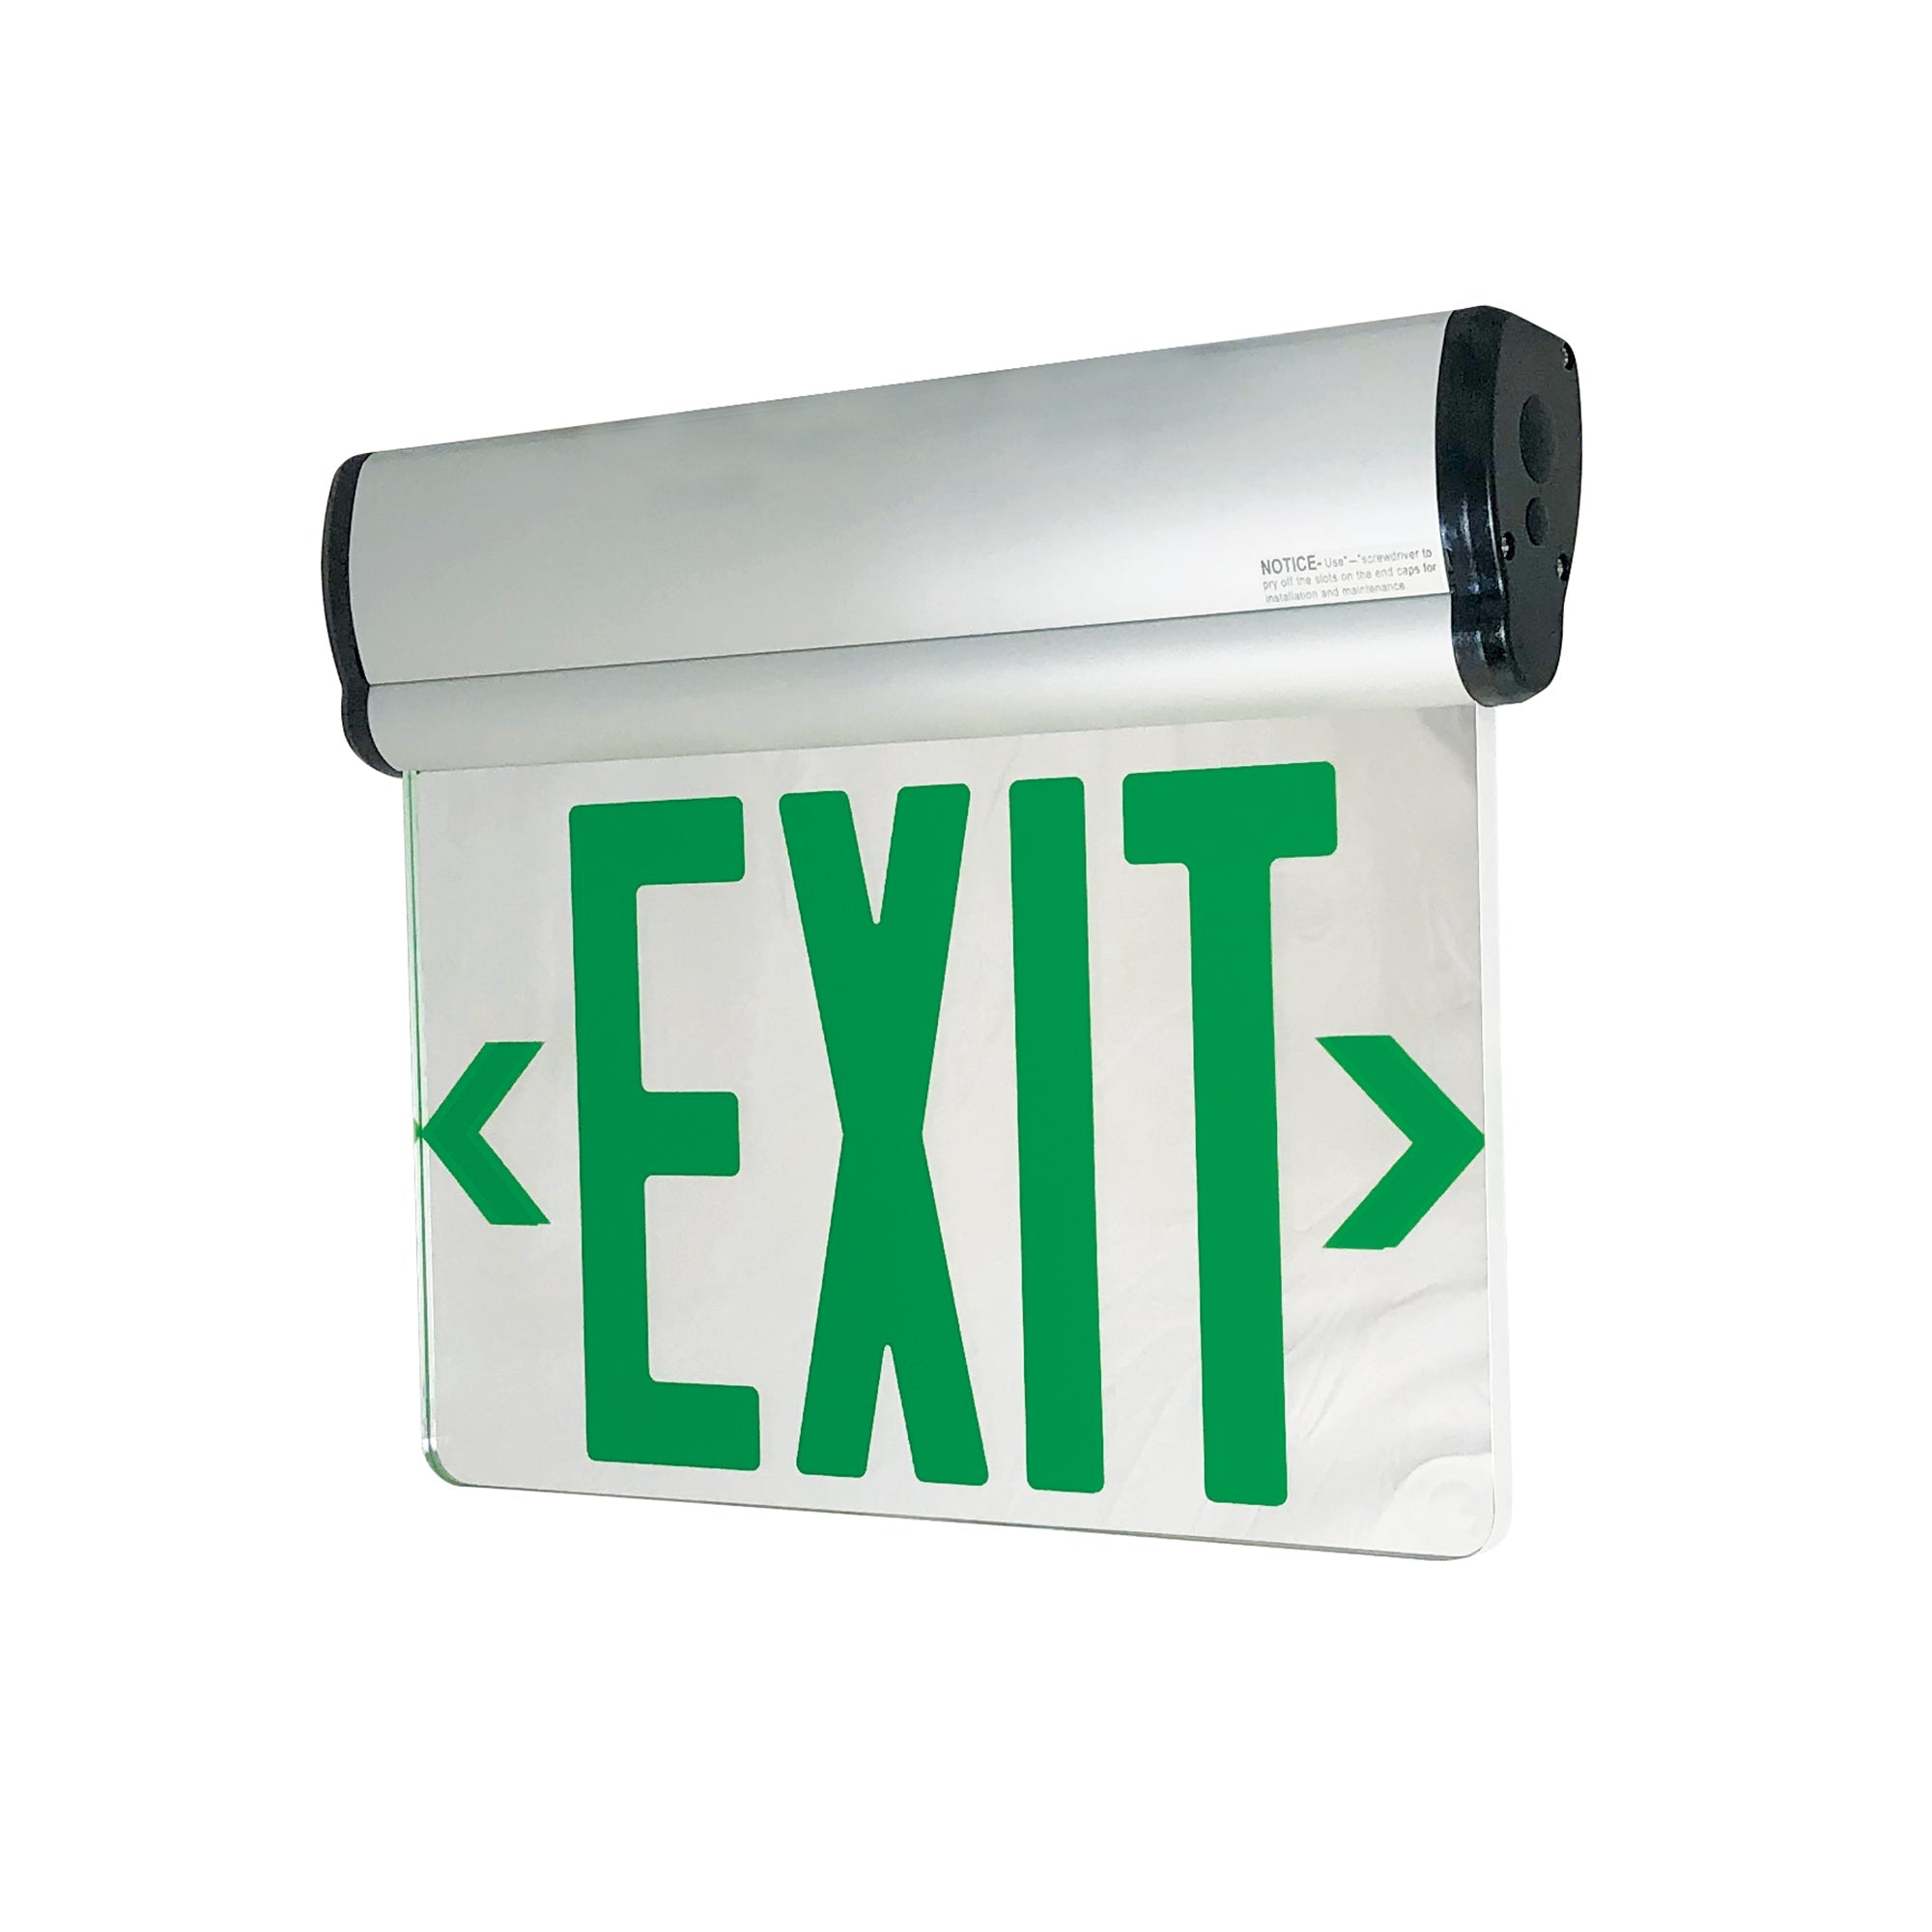 Nora Lighting NX-810-LEDG2MA - Exit / Emergency - Surface Adjustable LED Edge-Lit Exit Sign, AC Only, 6 Inch Green Letters, Double Face / Mirrored Acrylic, Aluminum Housing